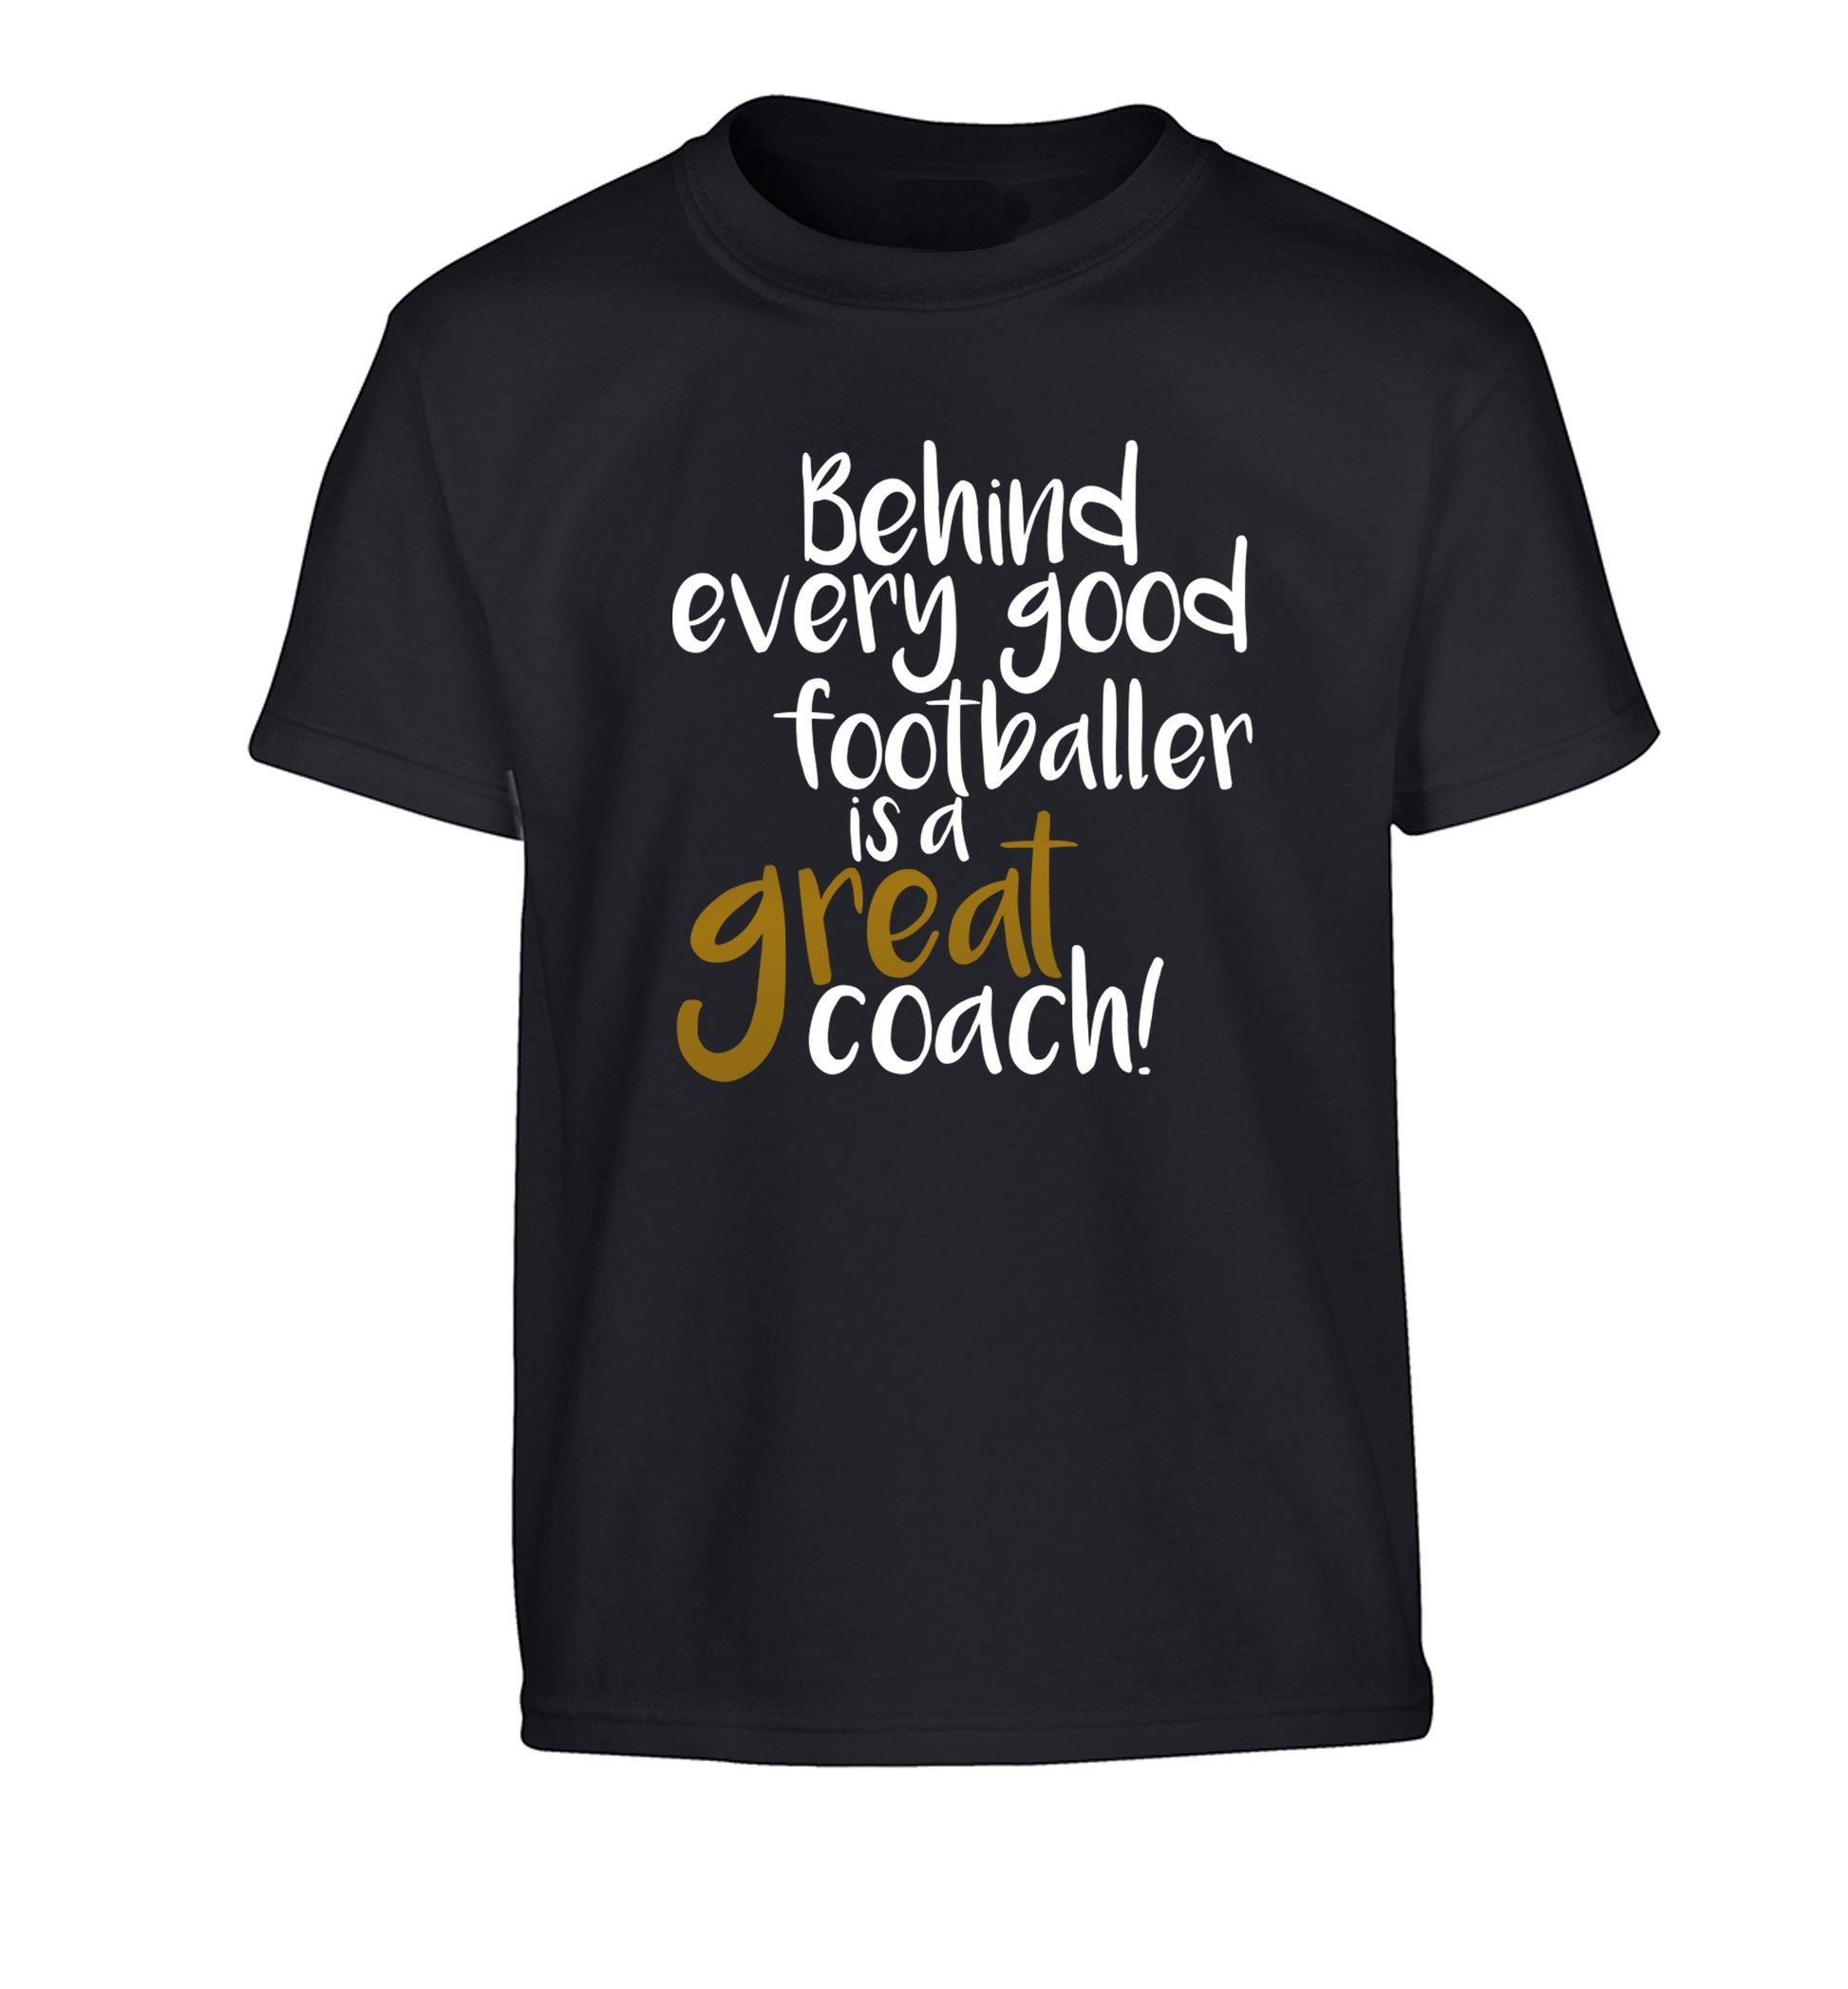 Behind every good footballer is a great coach! Children's black Tshirt 12-14 Years